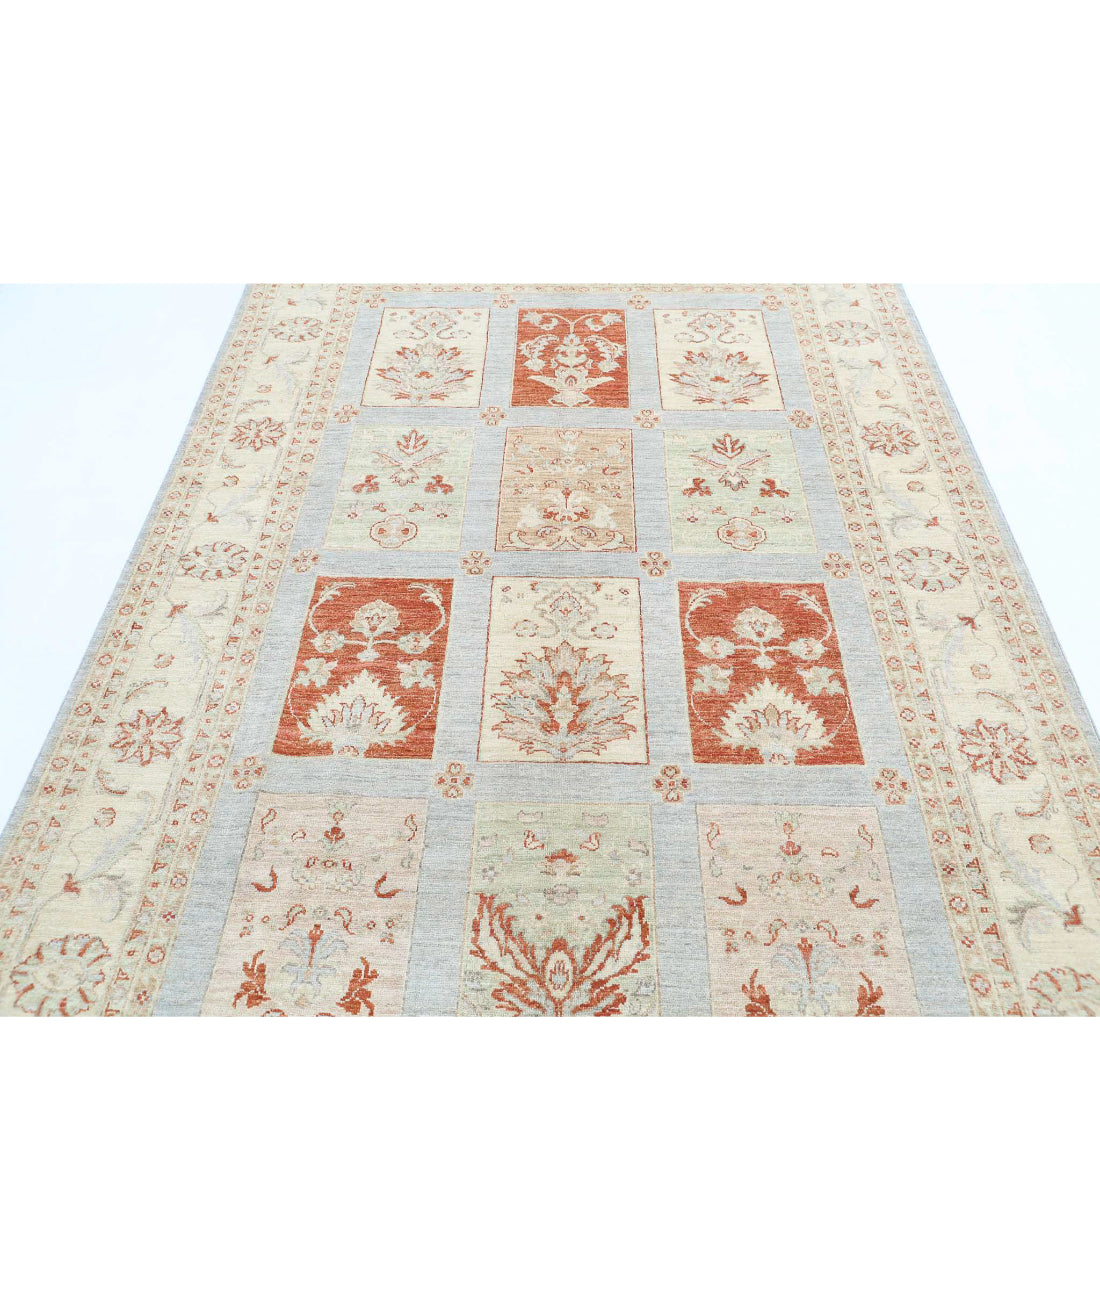 Serenity-hand-knotted-farhan-wool-rug-5012966-4